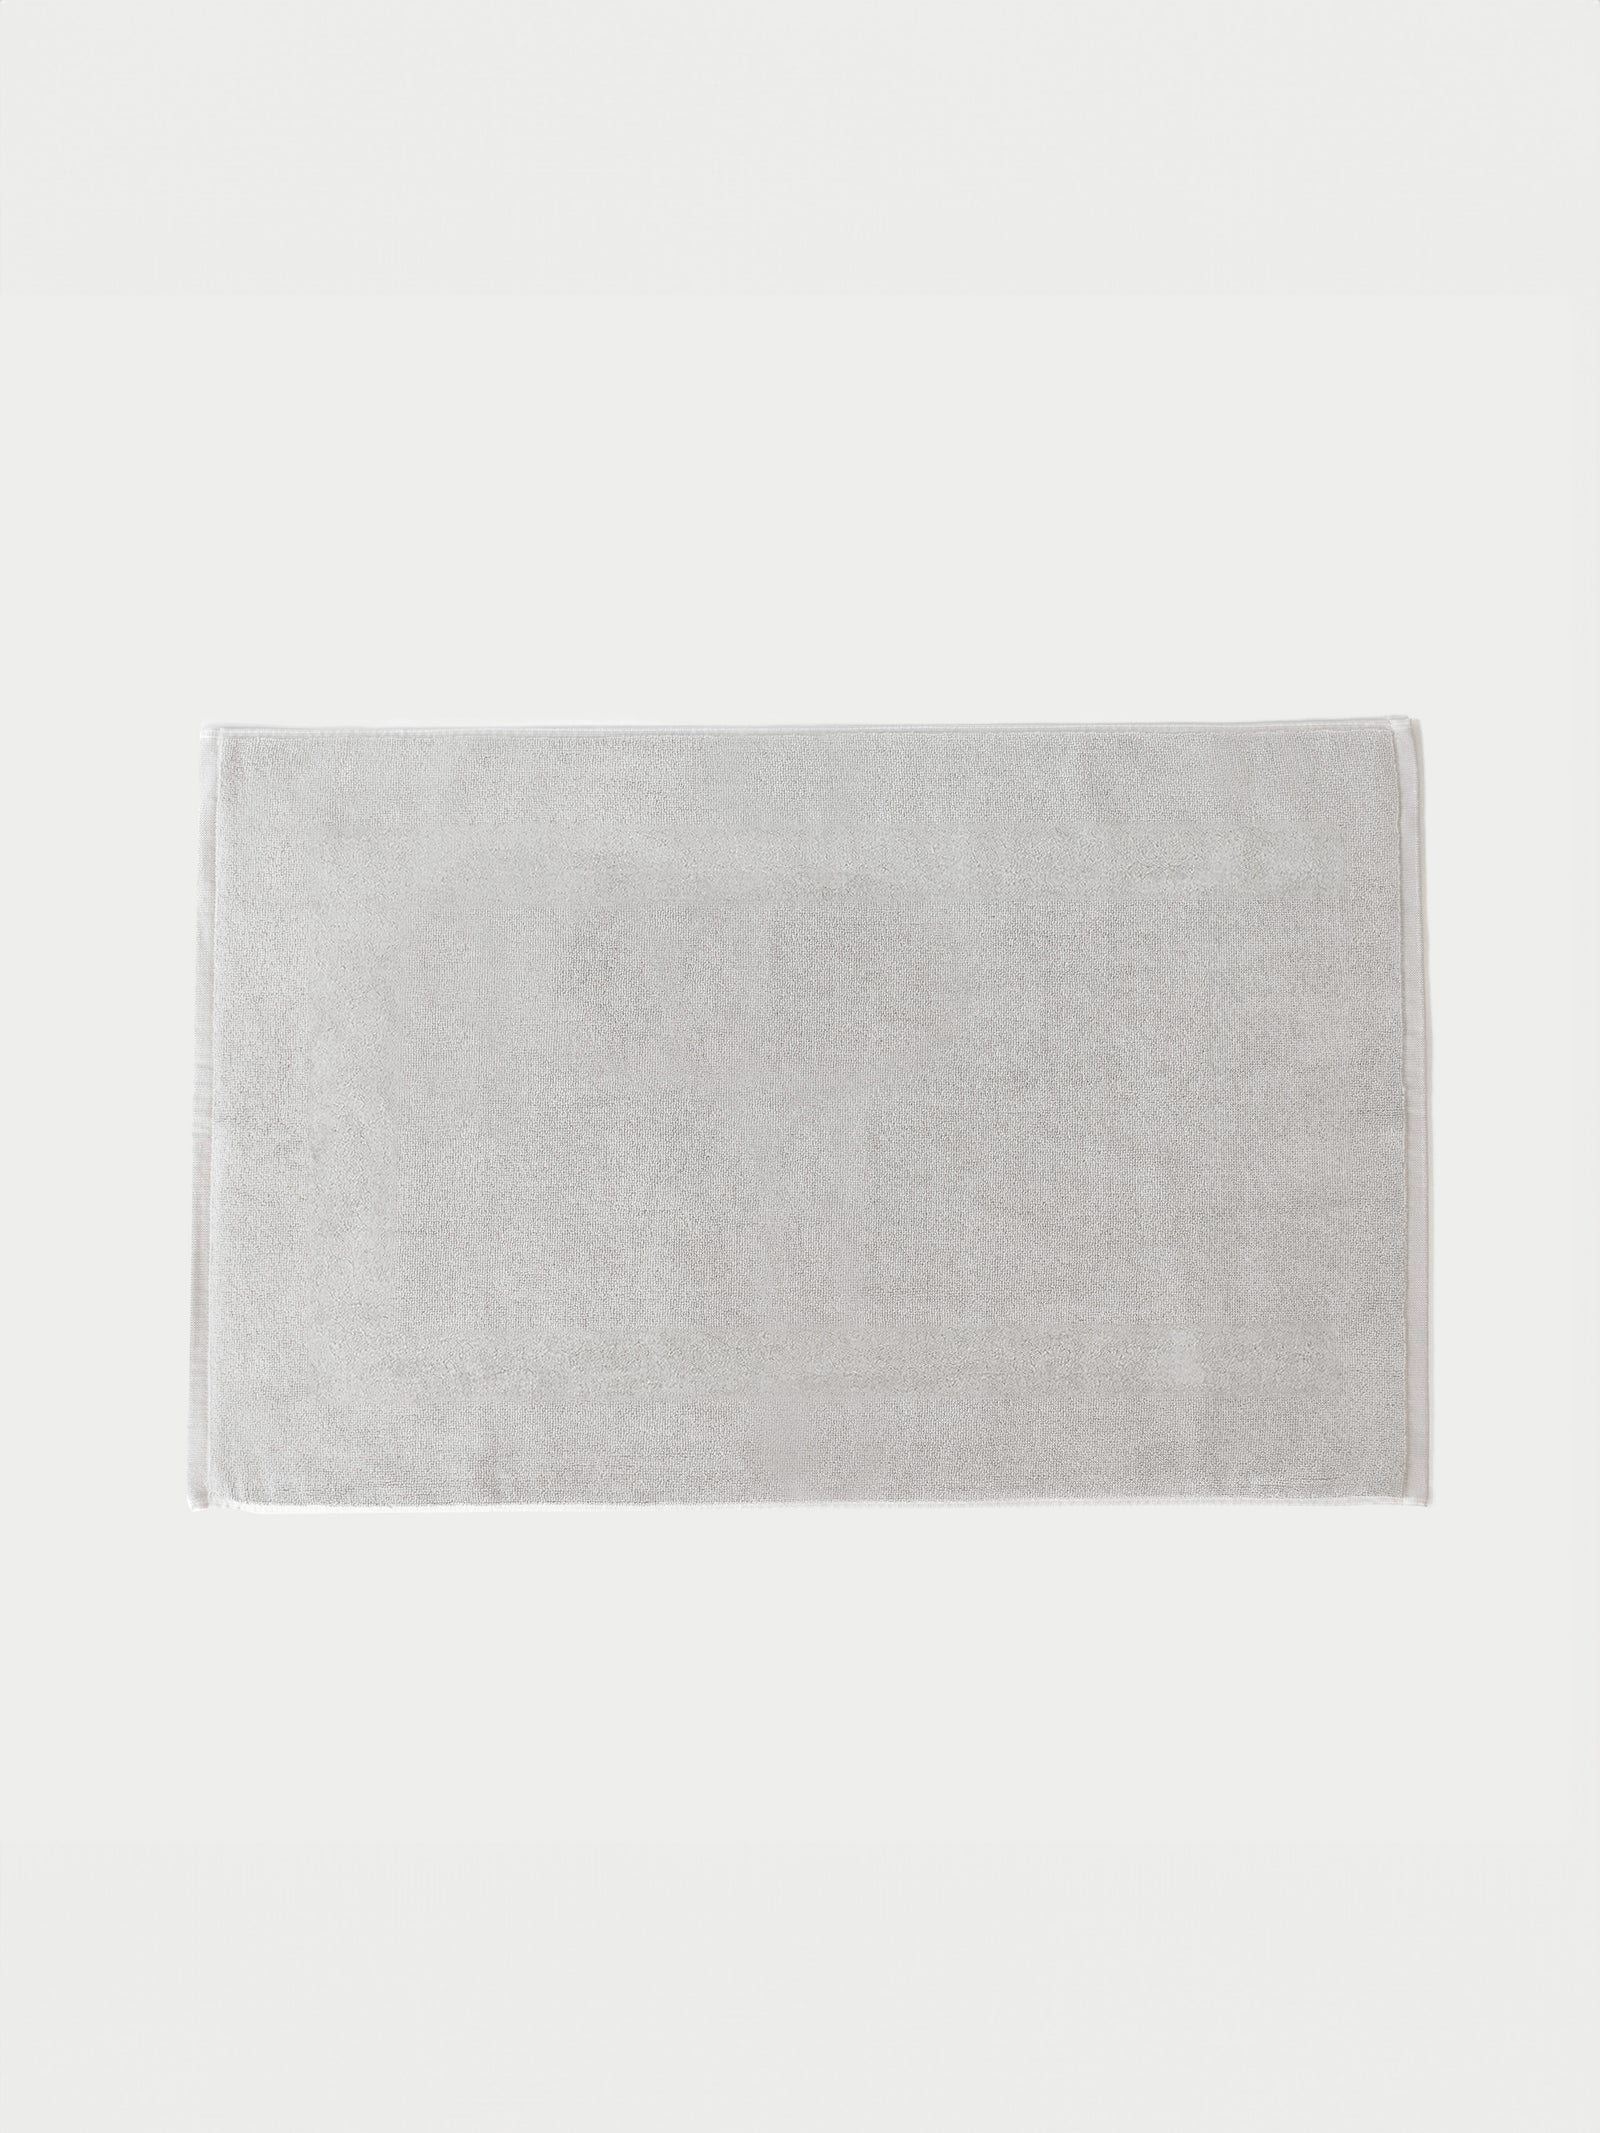 Light Grey looped terry bath mat resting on white background.